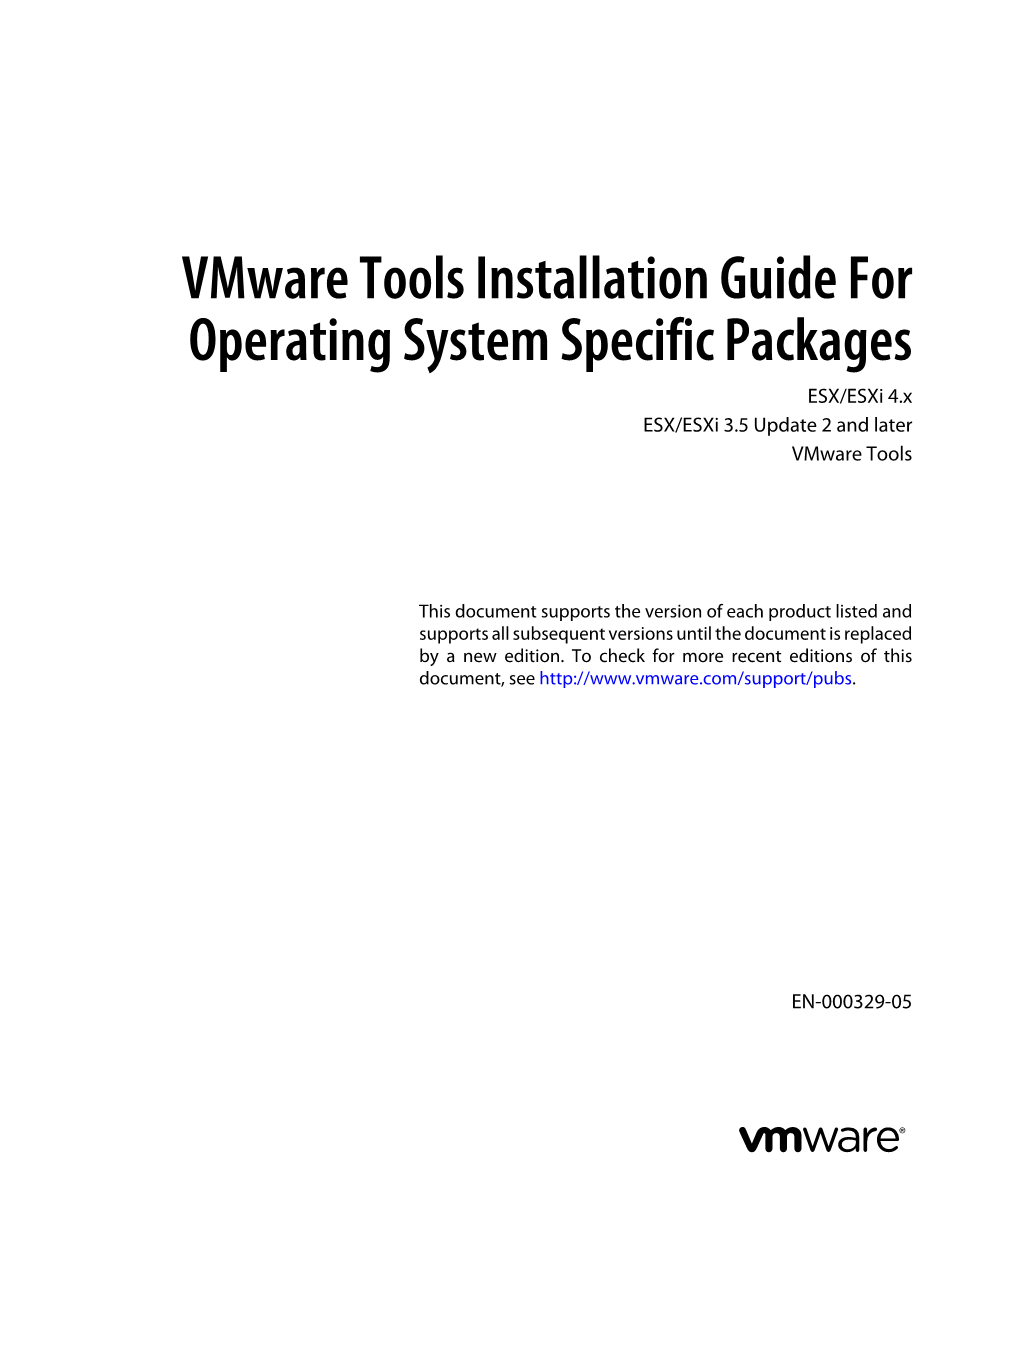 Vmware Tools Installation Guide for Operating System Specific Packages ESX/Esxi 4.X ESX/Esxi 3.5 Update 2 and Later Vmware Tools